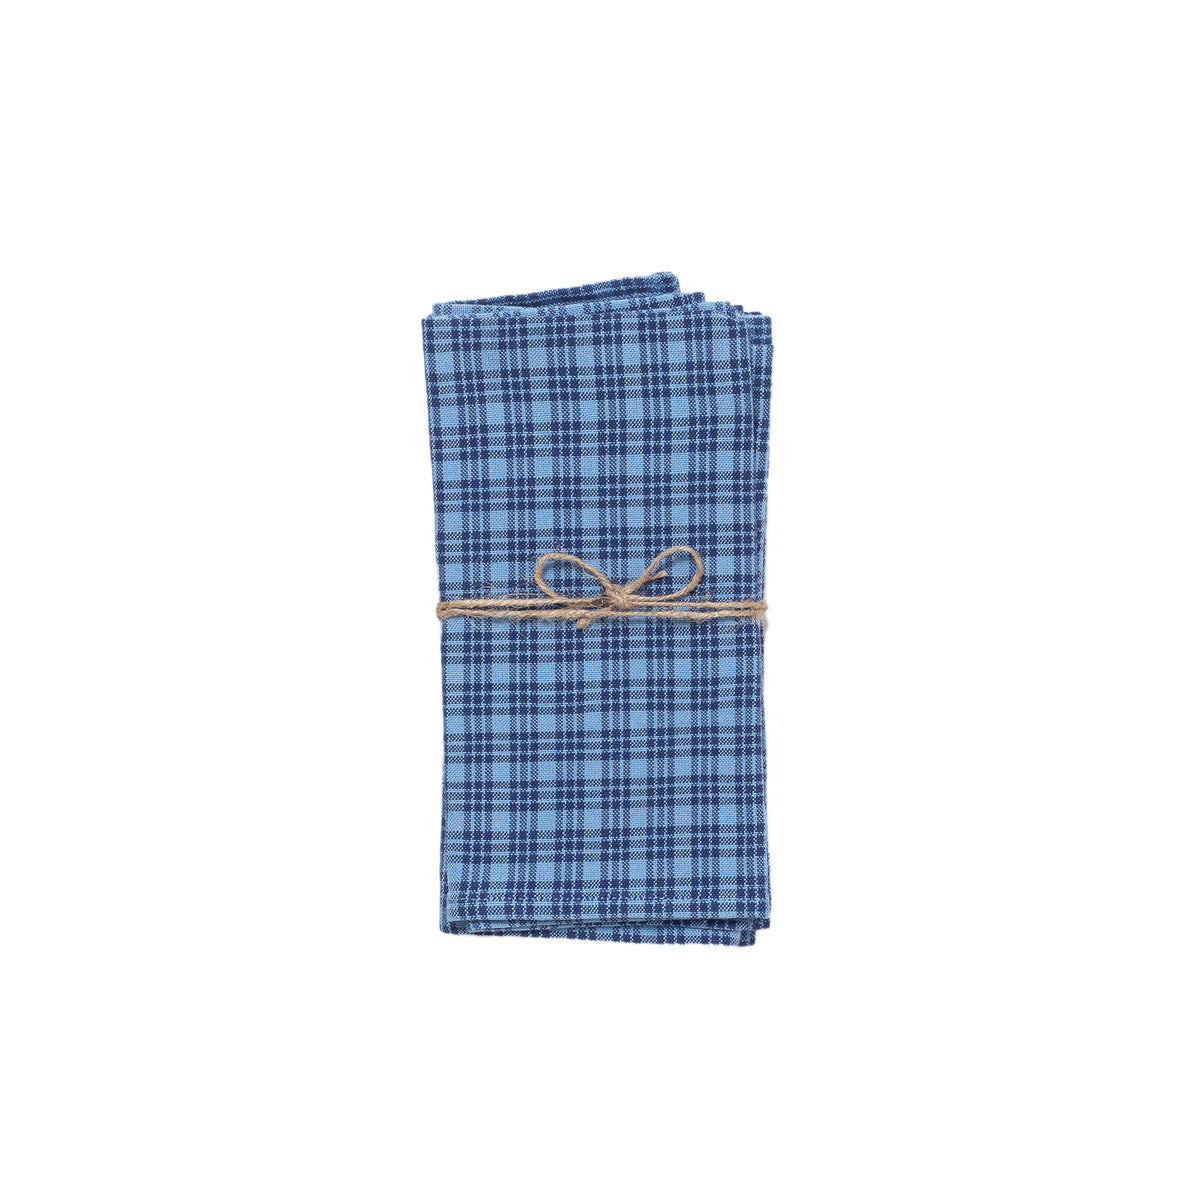 KATHERINE PLAID - Midnight Tissue Box Cover - Heather Taylor Home